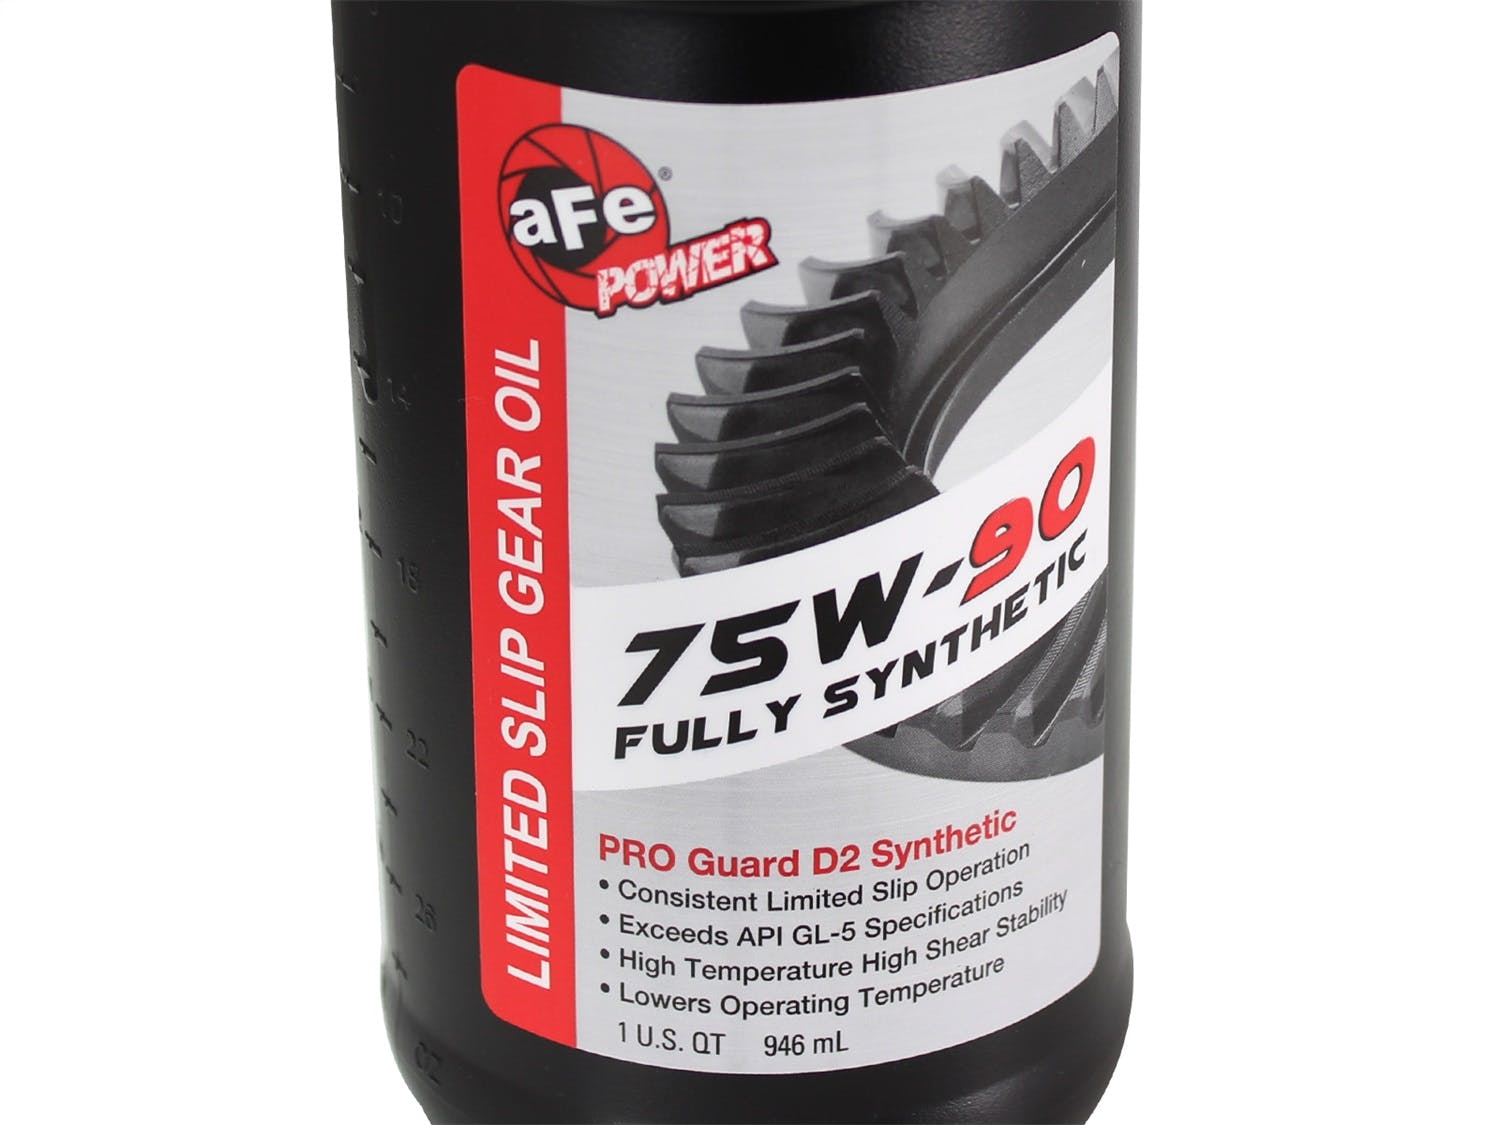 AFE 90-20001 aFe Power Chemicals Pro Guard D2 Synthetic